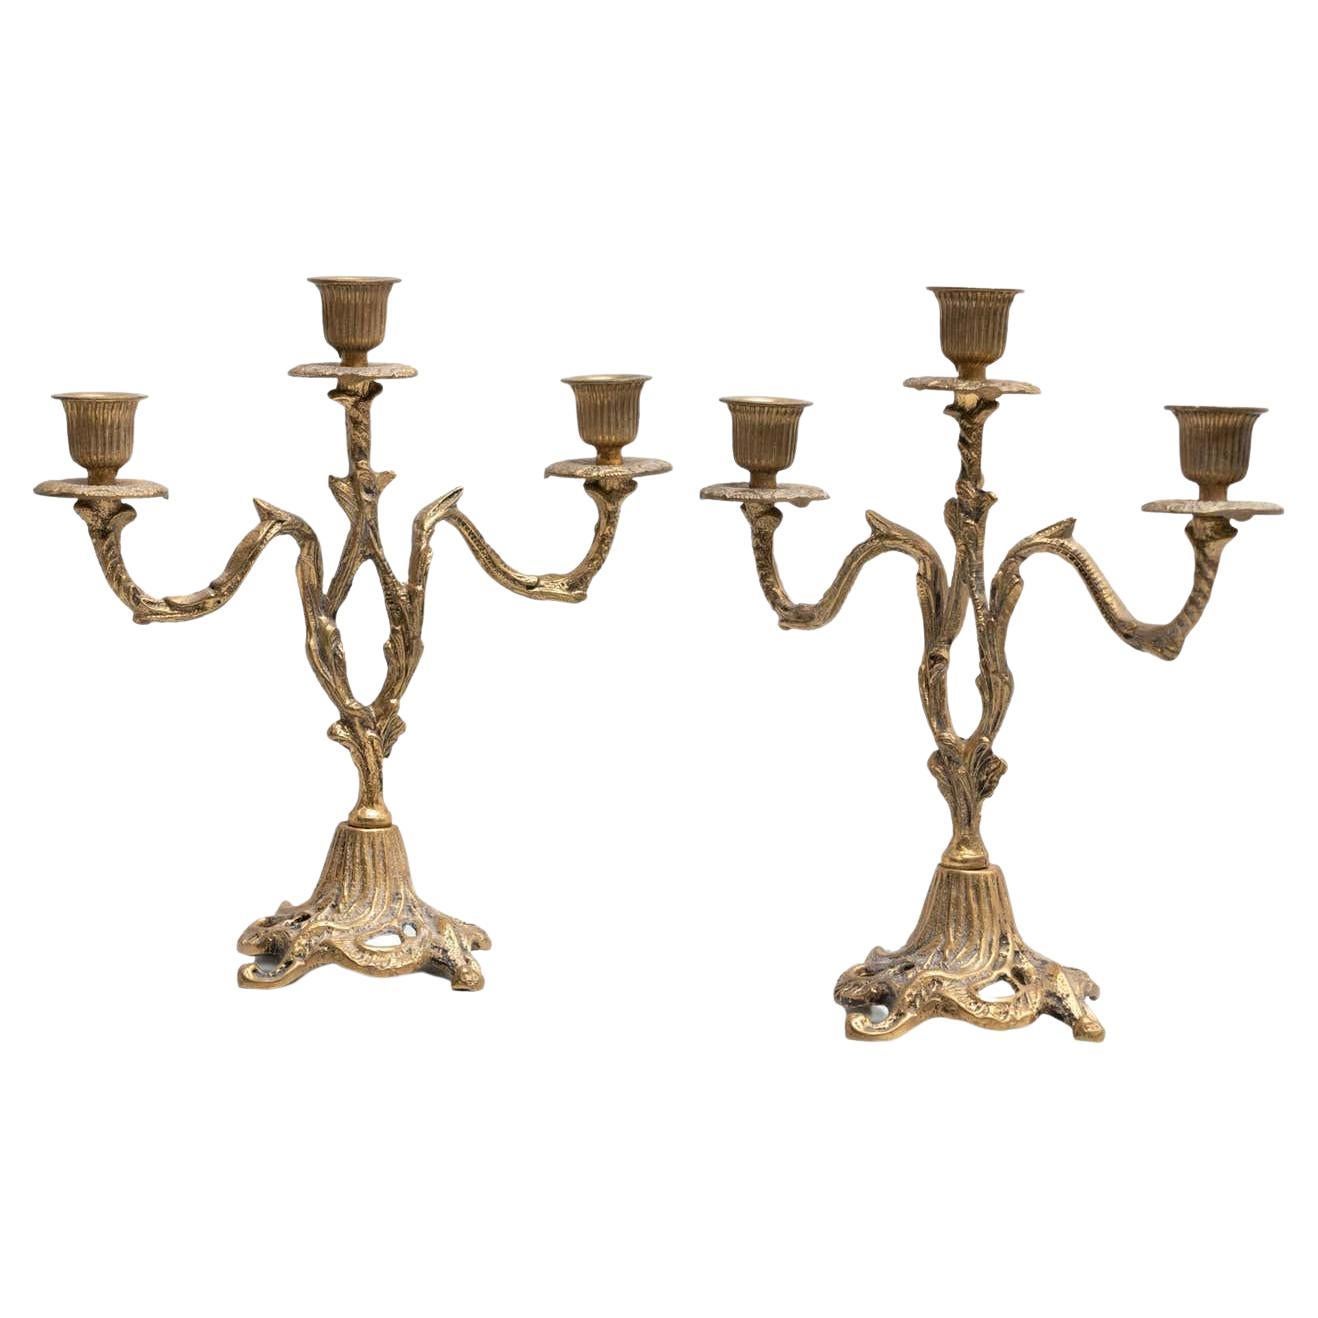 Set of Two Rustic Brass Candle Holders, circa 1950 For Sale